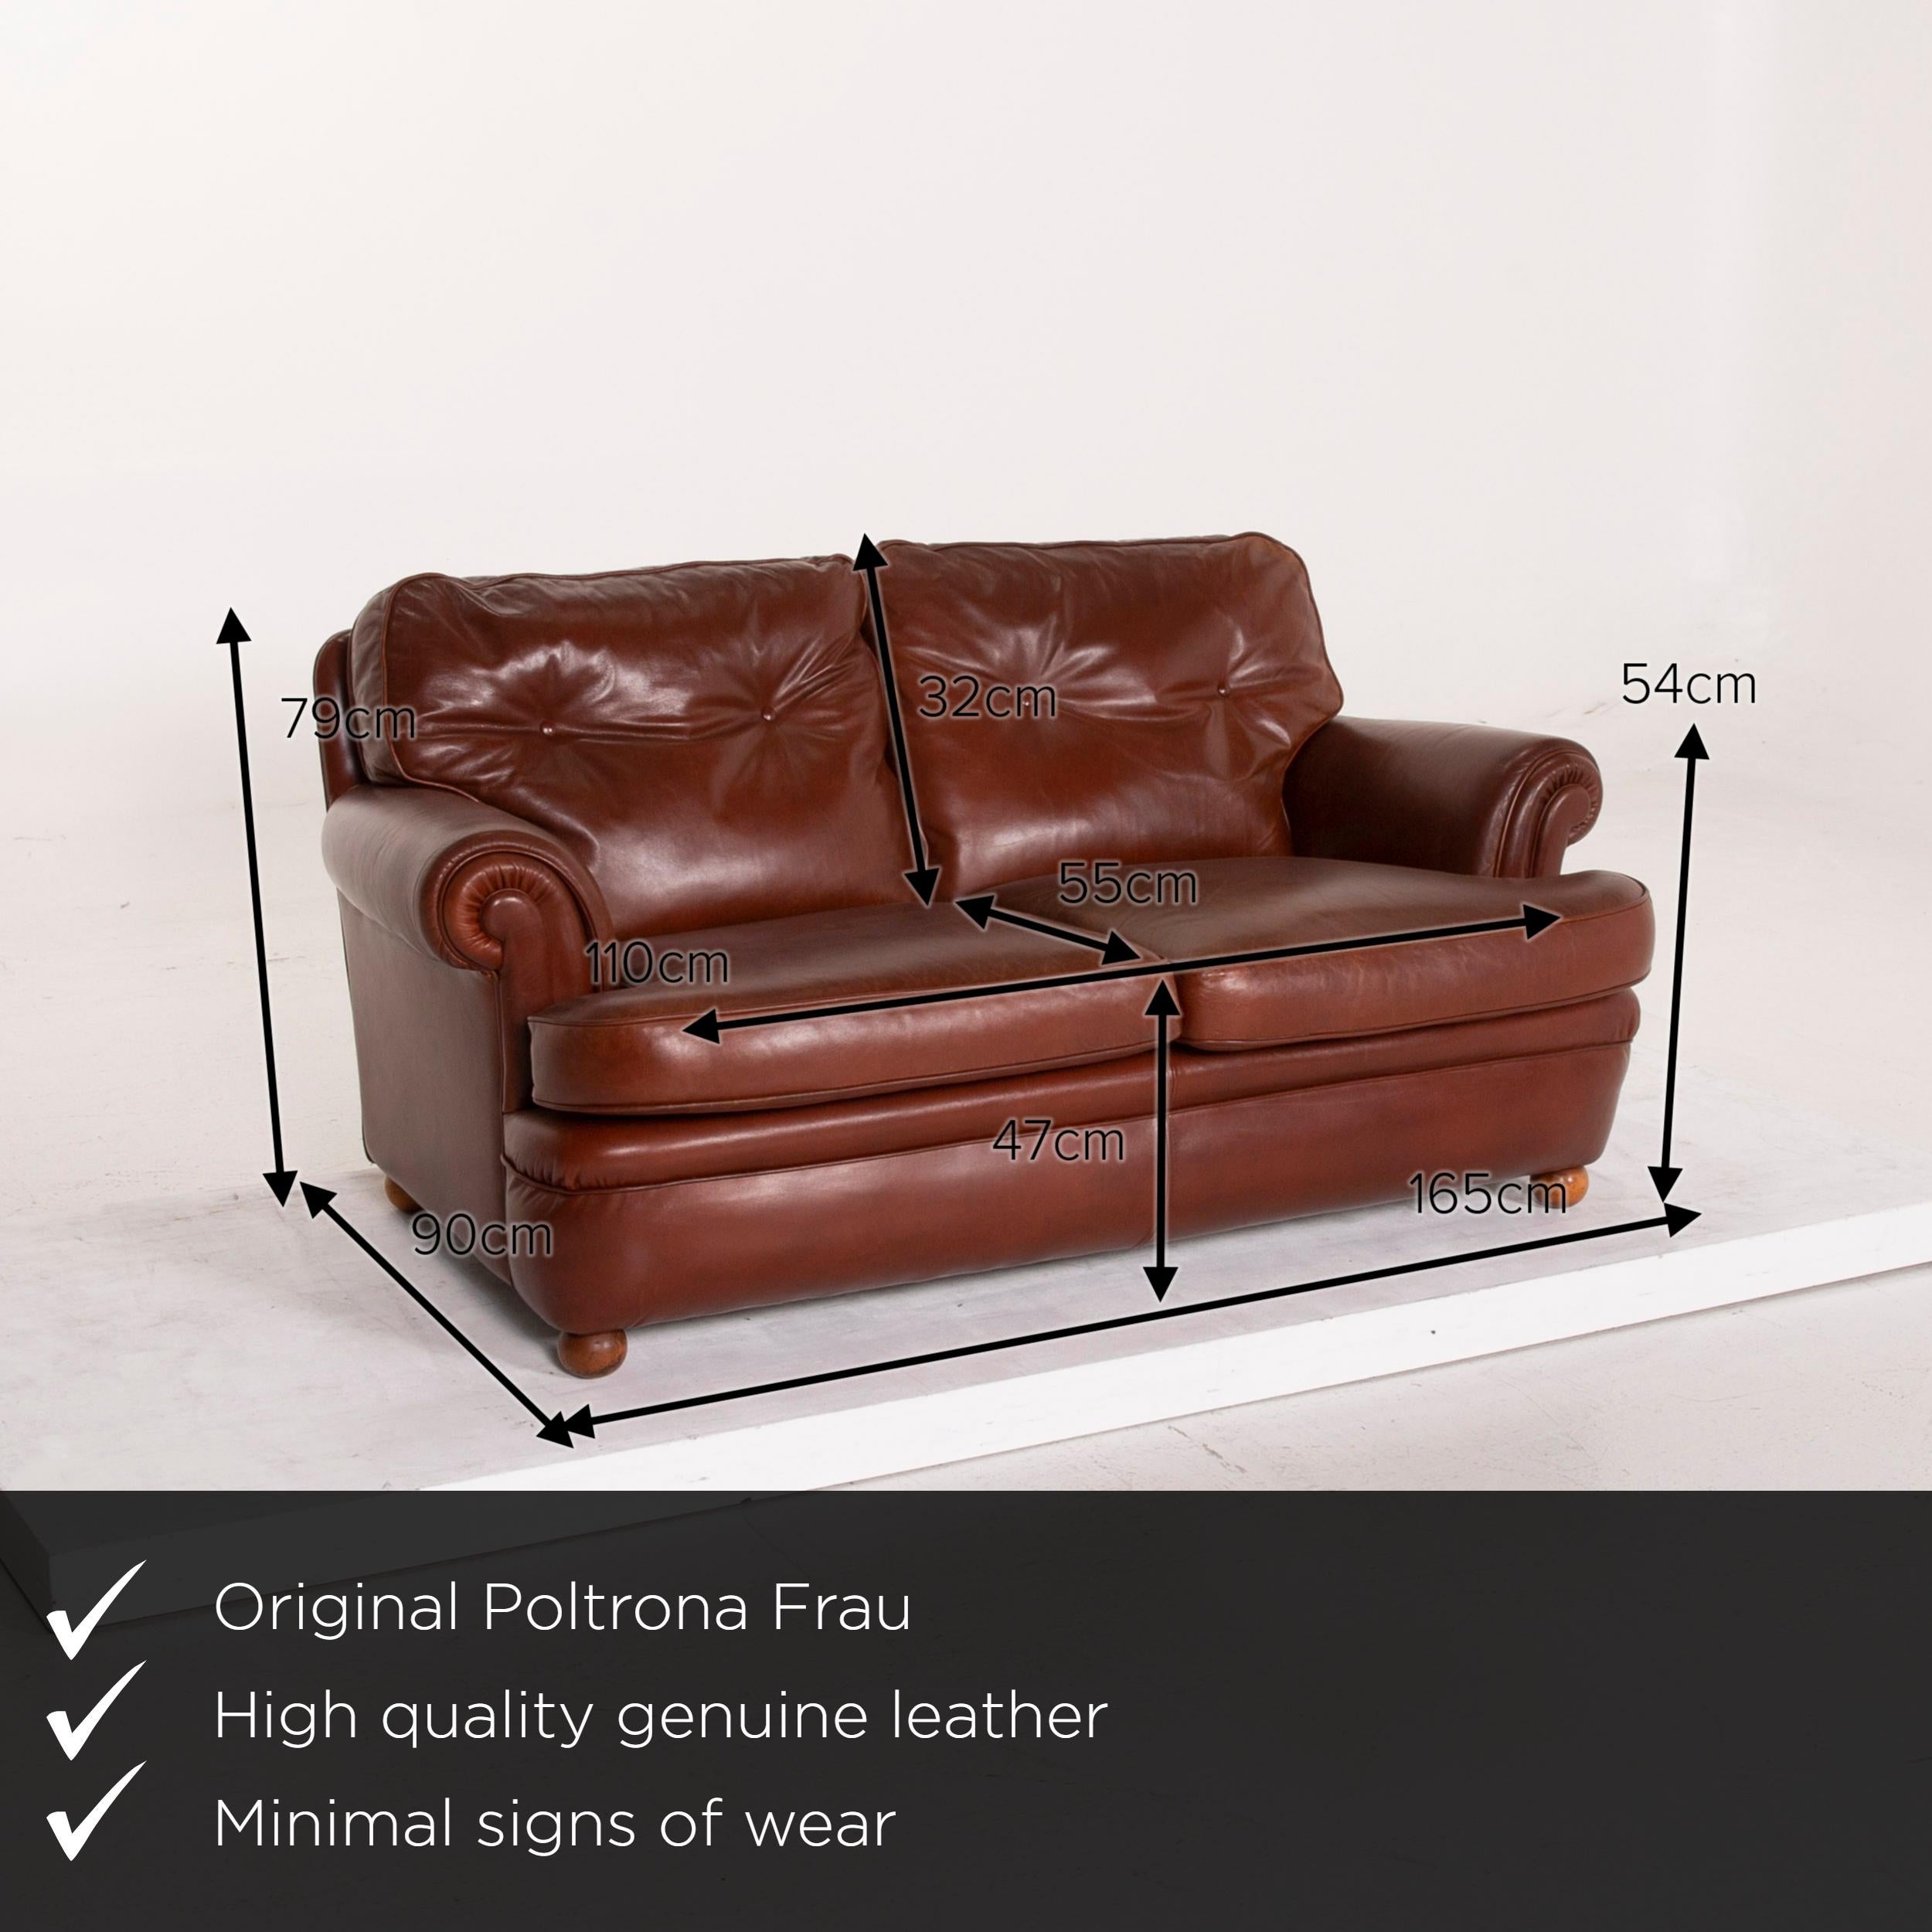 We present to you a Poltrona Frau leather sofa cognac two-seat.

 

 Product measurements in centimeters:
 

Depth 90
Width 175
Height 79
Seat height 47
Rest height 54
Seat depth 55
Seat width 110
Back height 32.